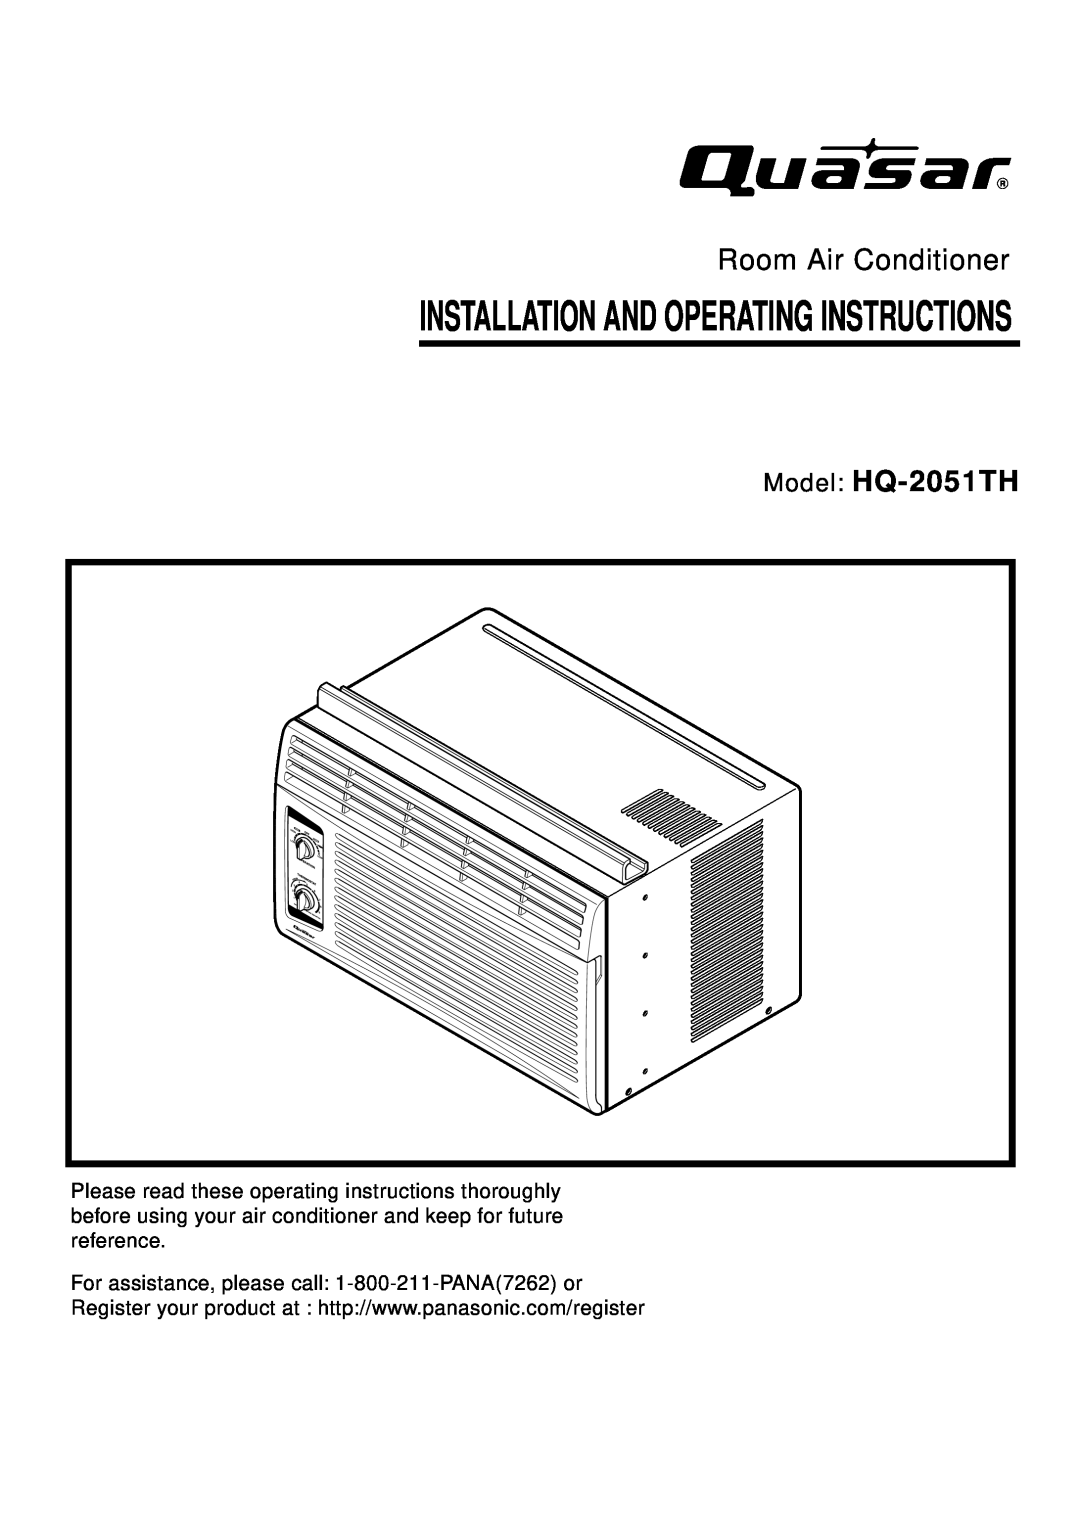 Panasonic manual Model HQ-2051TH, Installation And Operating Instructions, Room Air Conditioner 